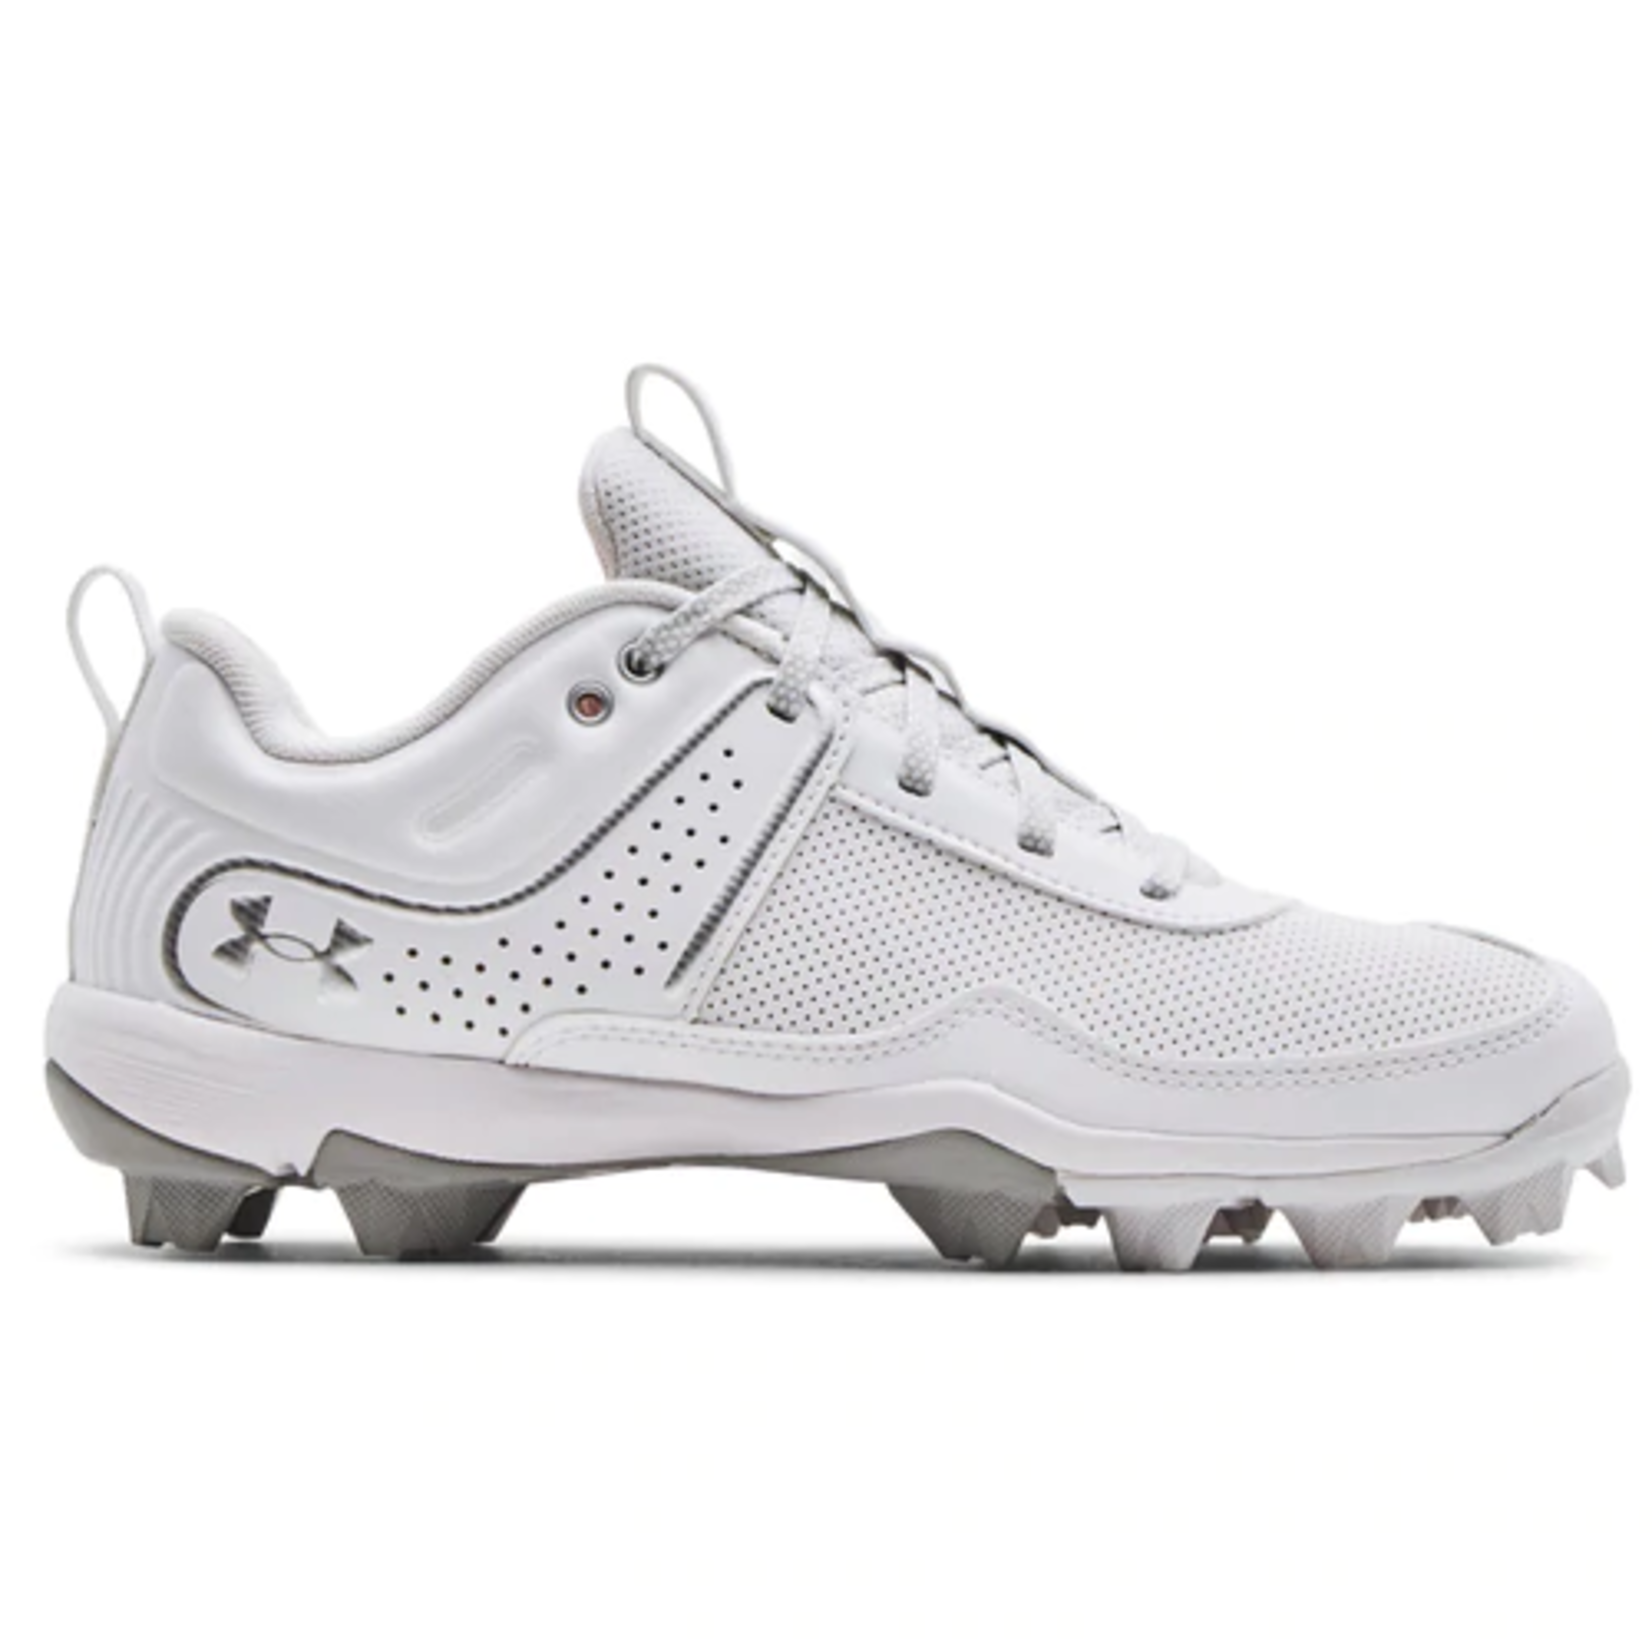 Under Armour Under Armour Baseball Shoes, Glyde RM, Ladies